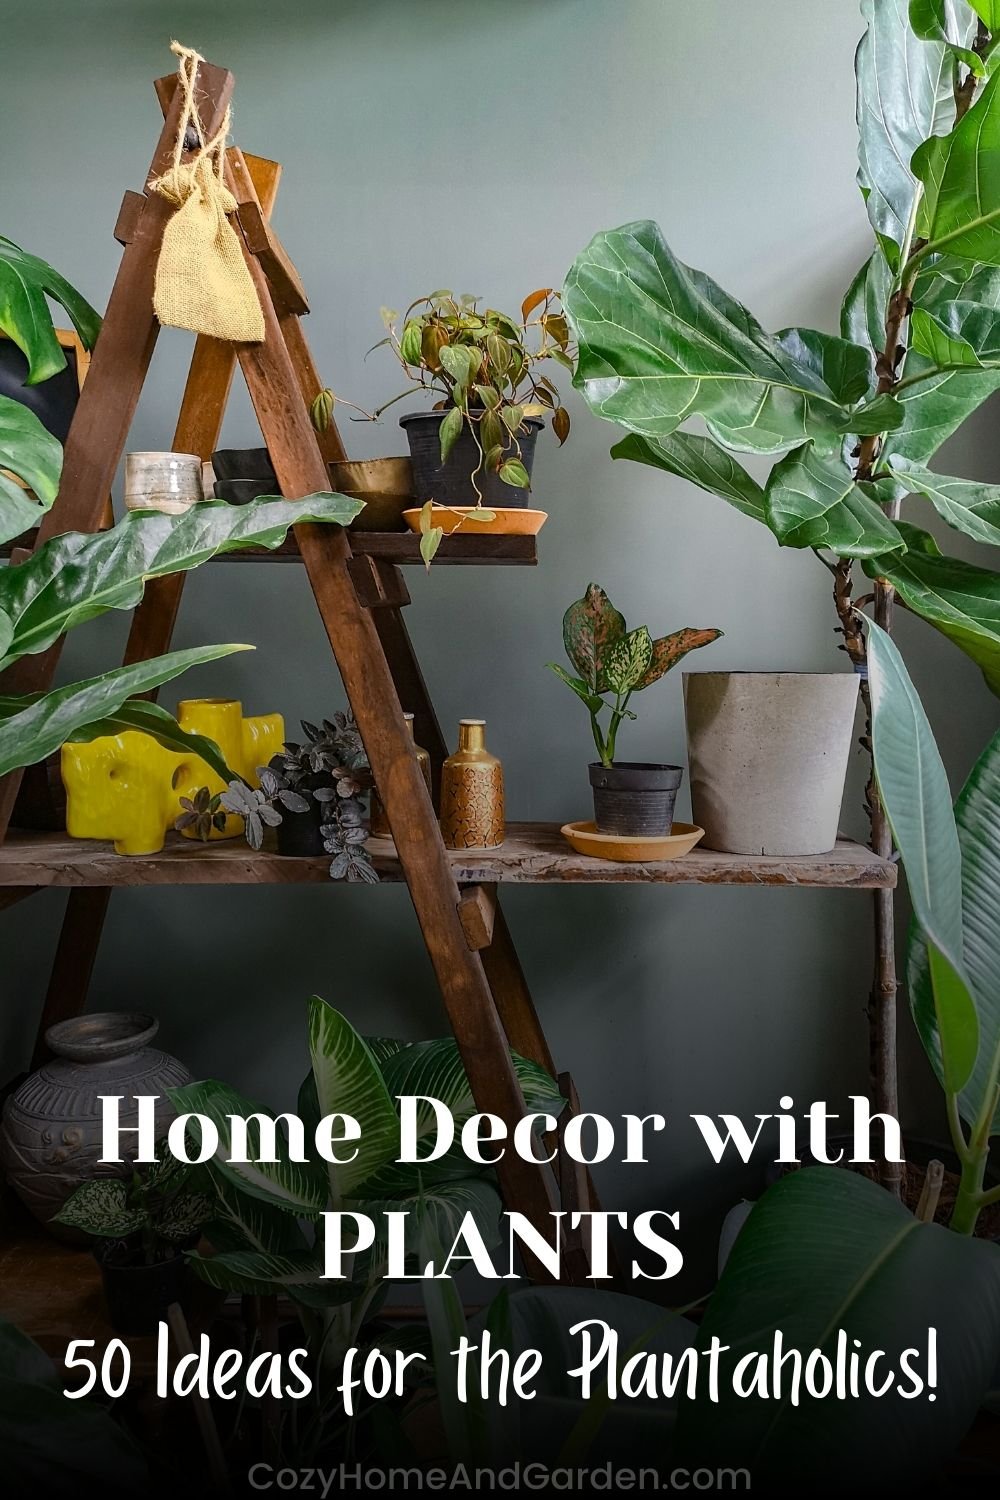 Home Decor with Plants – 50 Ideas For The Real Plantaholics